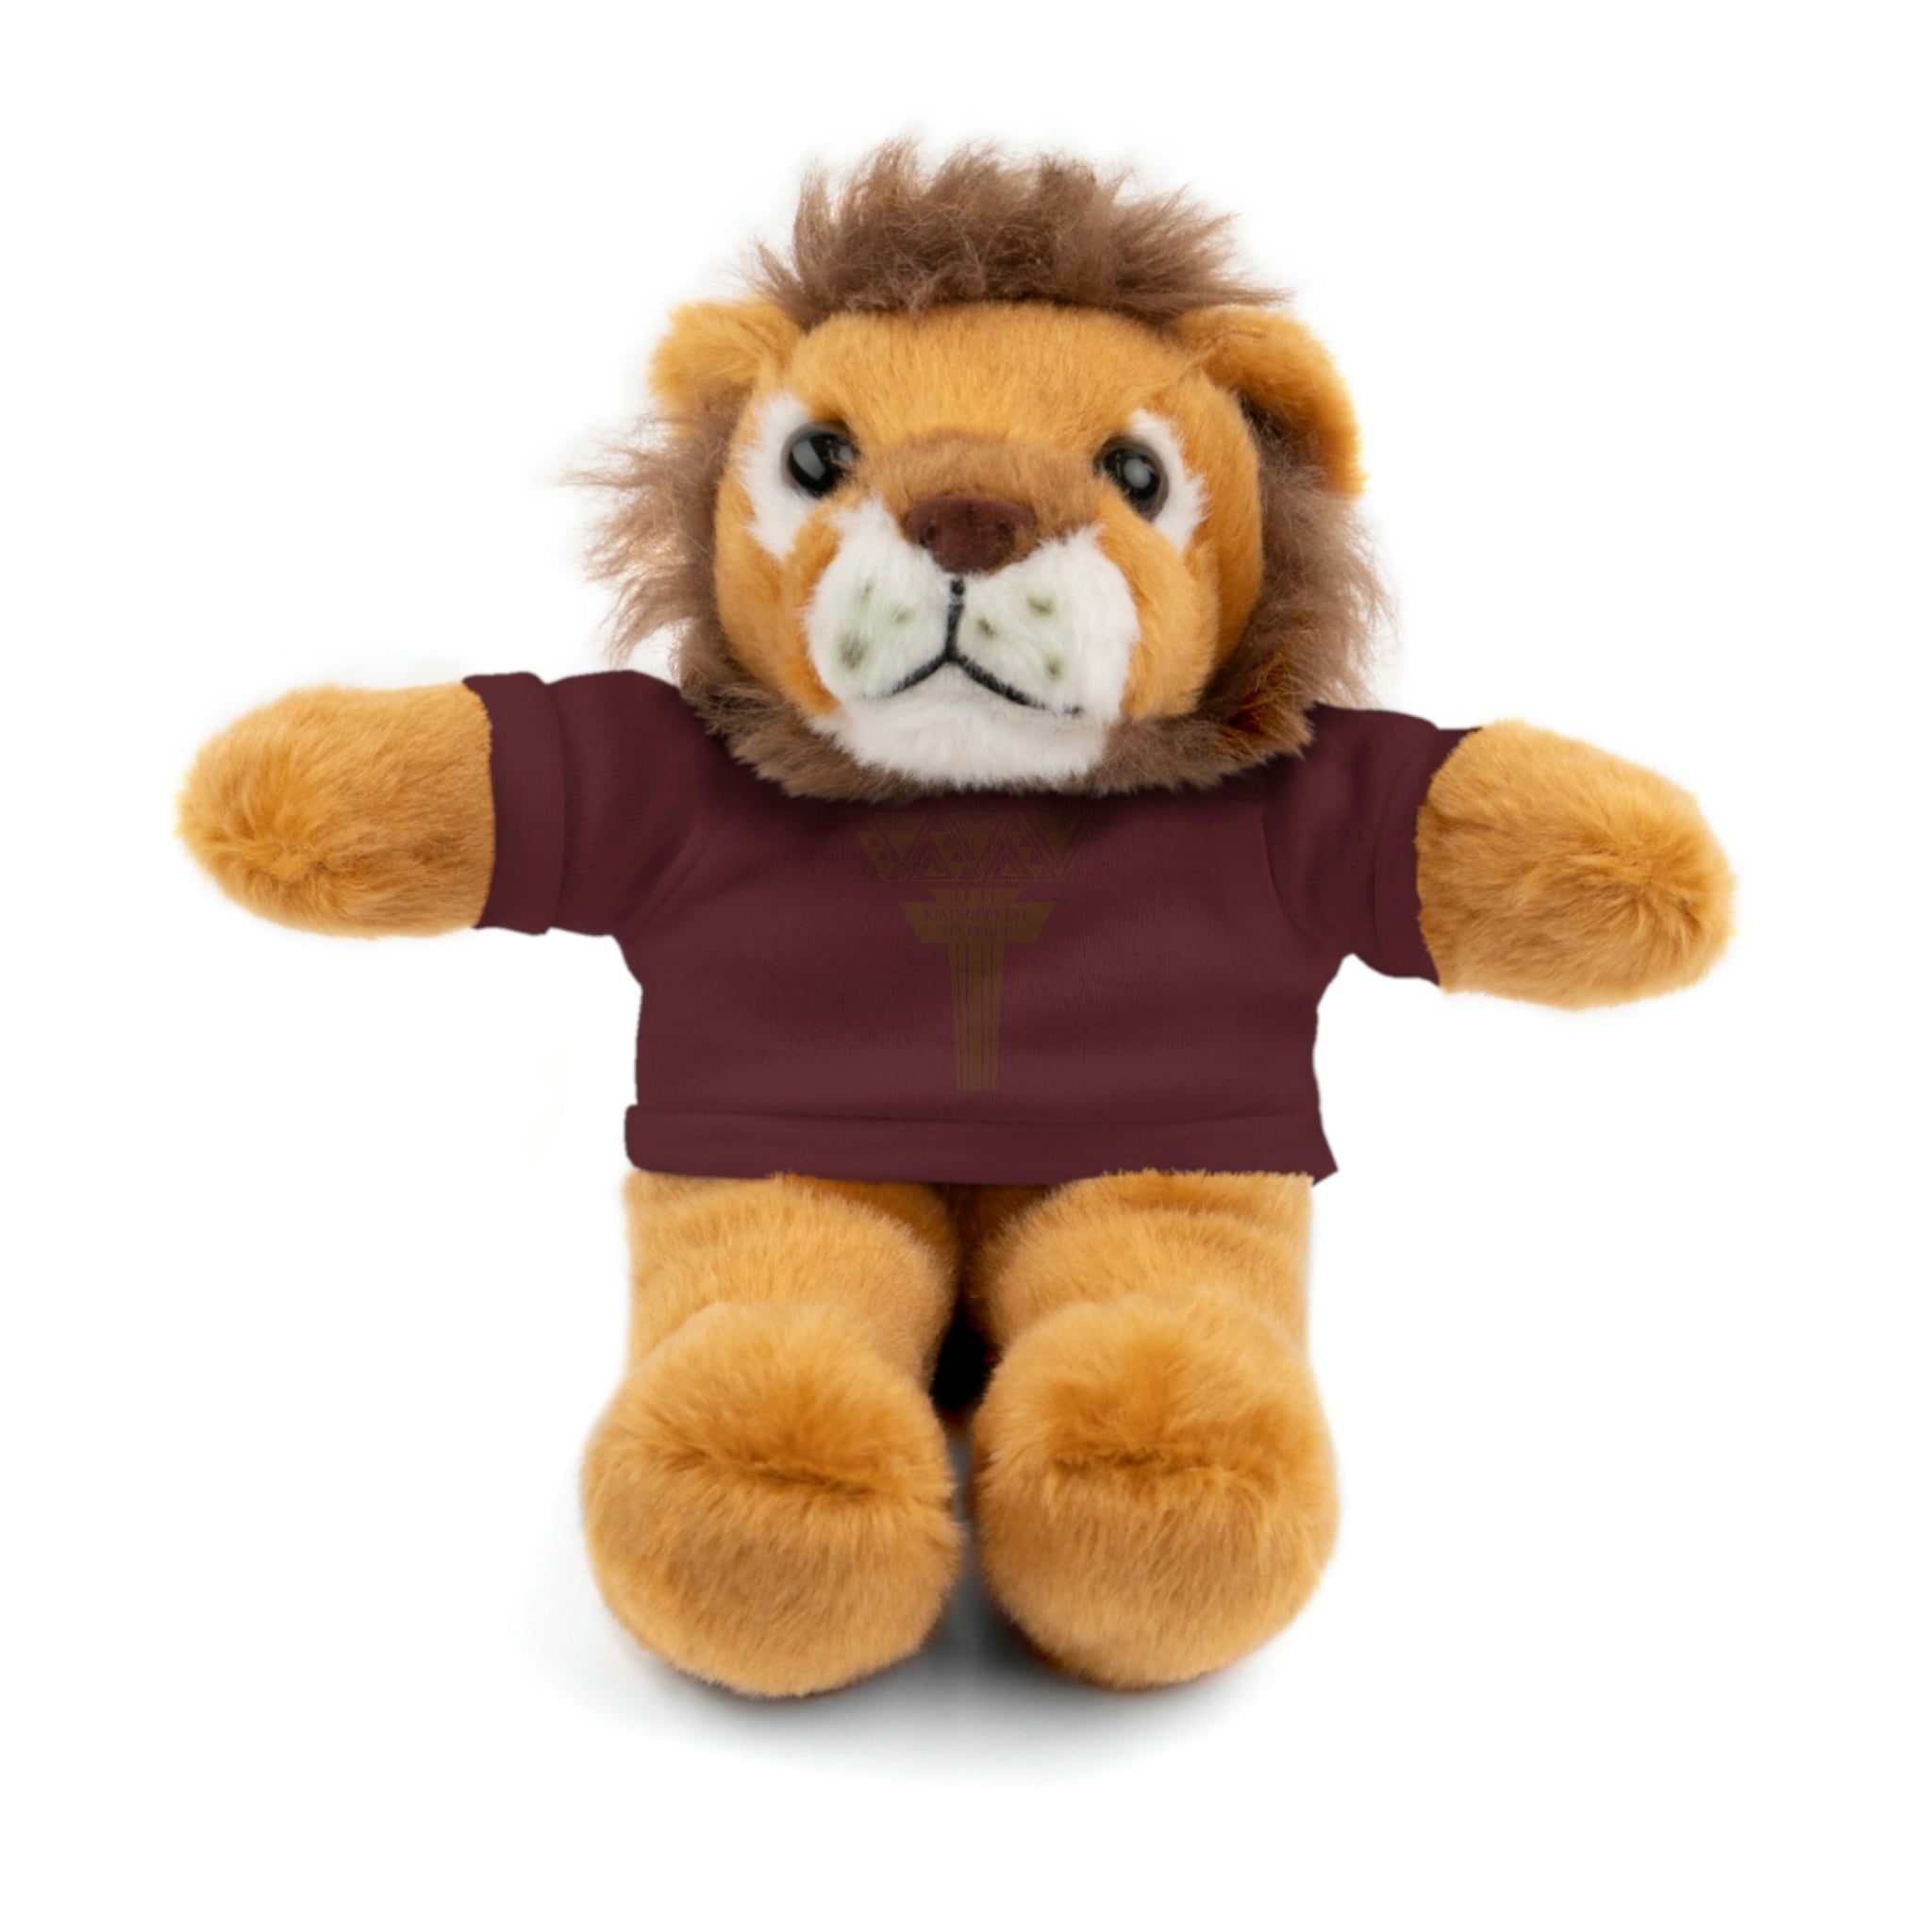 Auvergne Maisonnette Stuffed Animals with Tee